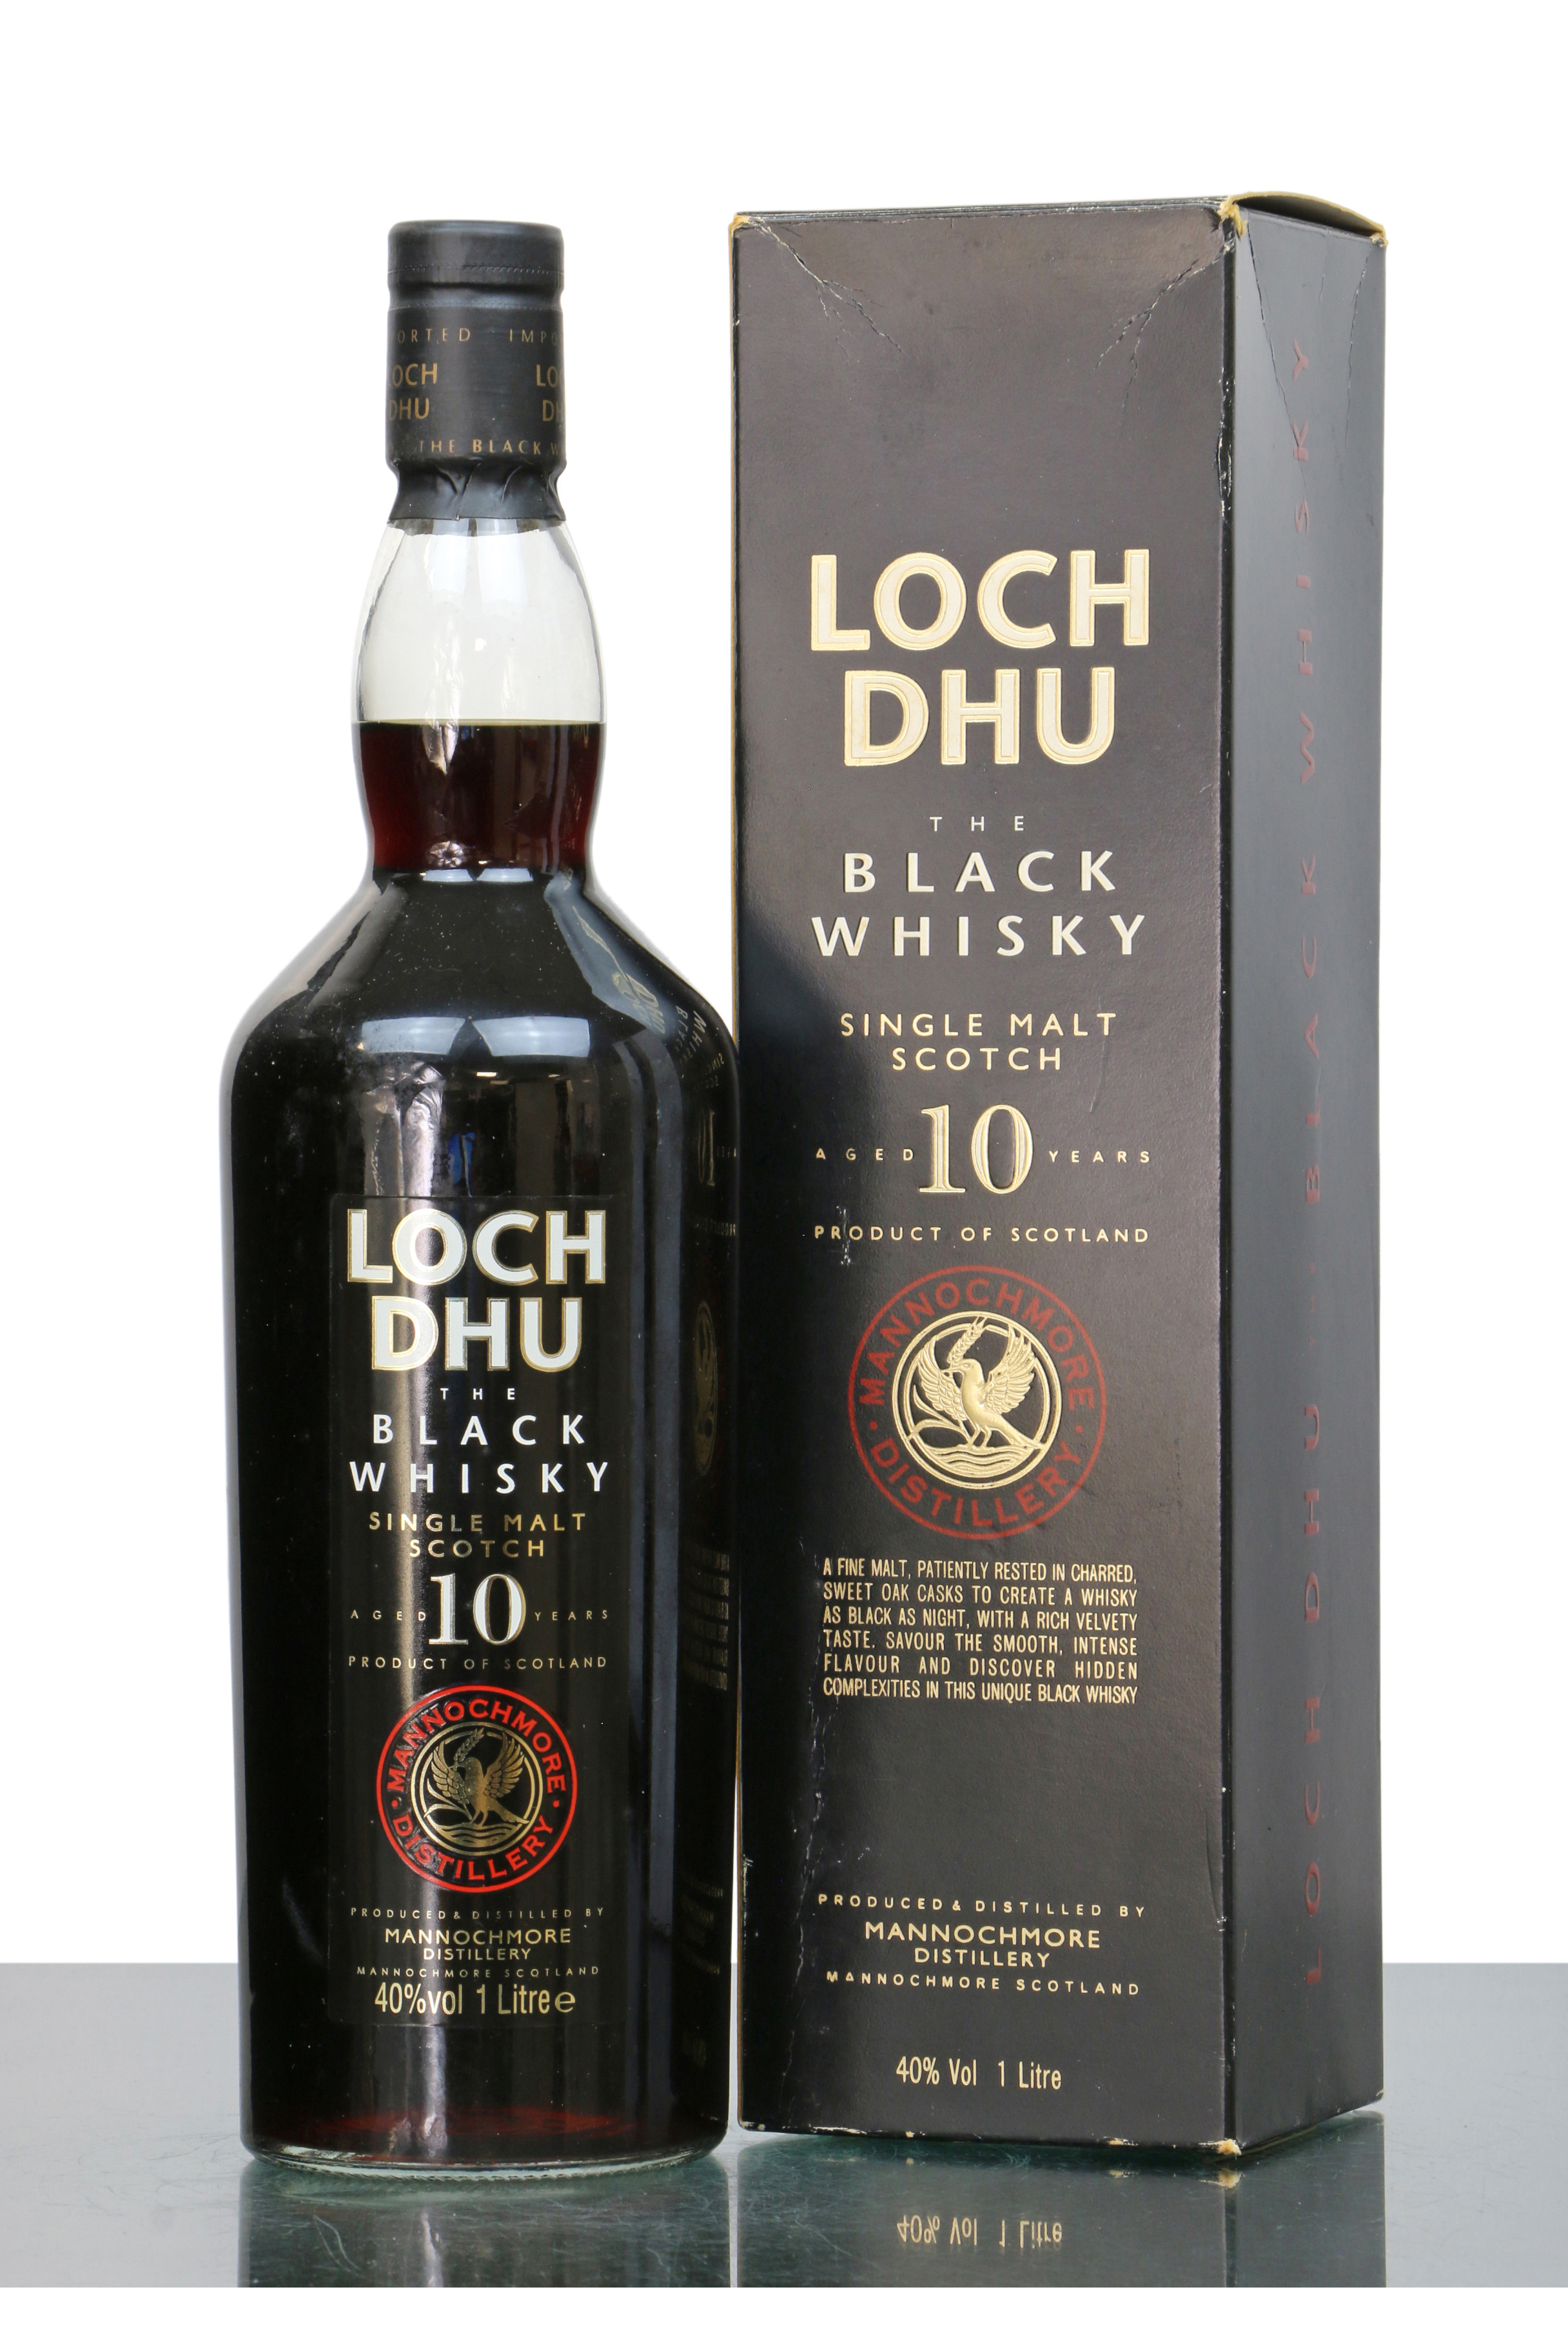 Loch Dhu 10 Years Old - The Black Whisky (1 Litre) - Just Whisky Auctions